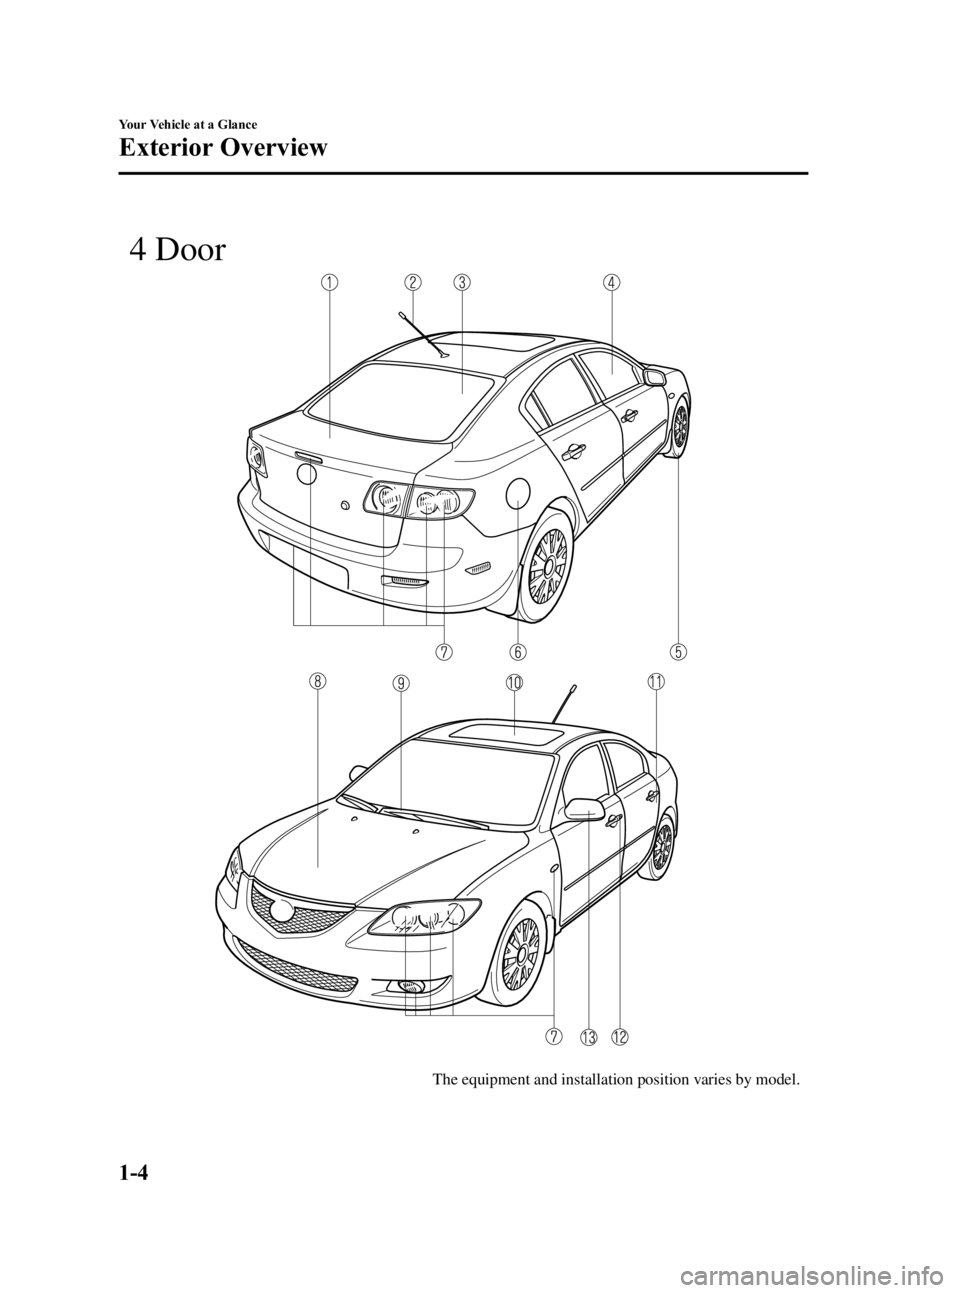 MAZDA MODEL 3 5-DOOR 2006  Owners Manual Black plate (10,1)
The equipment and installation position varies by model.
 4 Door
1-4
Your Vehicle at a Glance
Exterior Overview
Mazda3_8U55-EA-05G_Edition3 Page10
Tuesday, September 13 2005 10:40 A